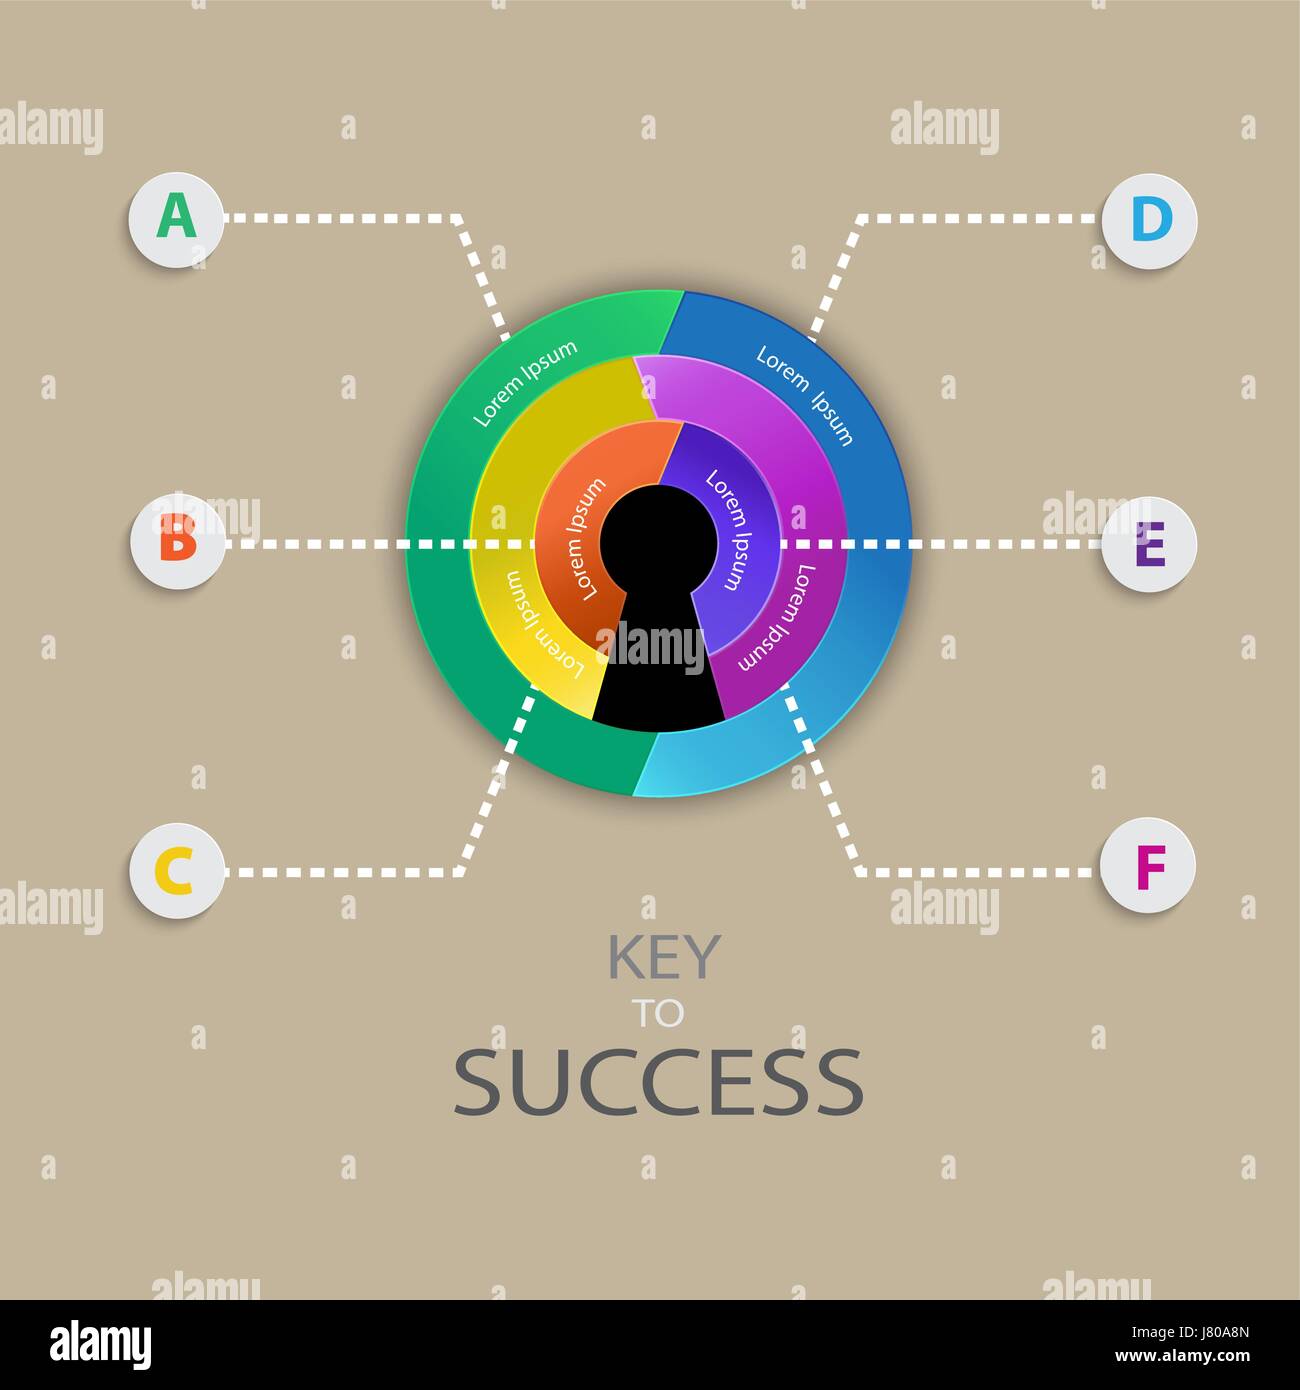 Business infographic for Key to Success  concept. Vector  illustration for web design, mobile, layout, diagram, artwork. Stock Vector